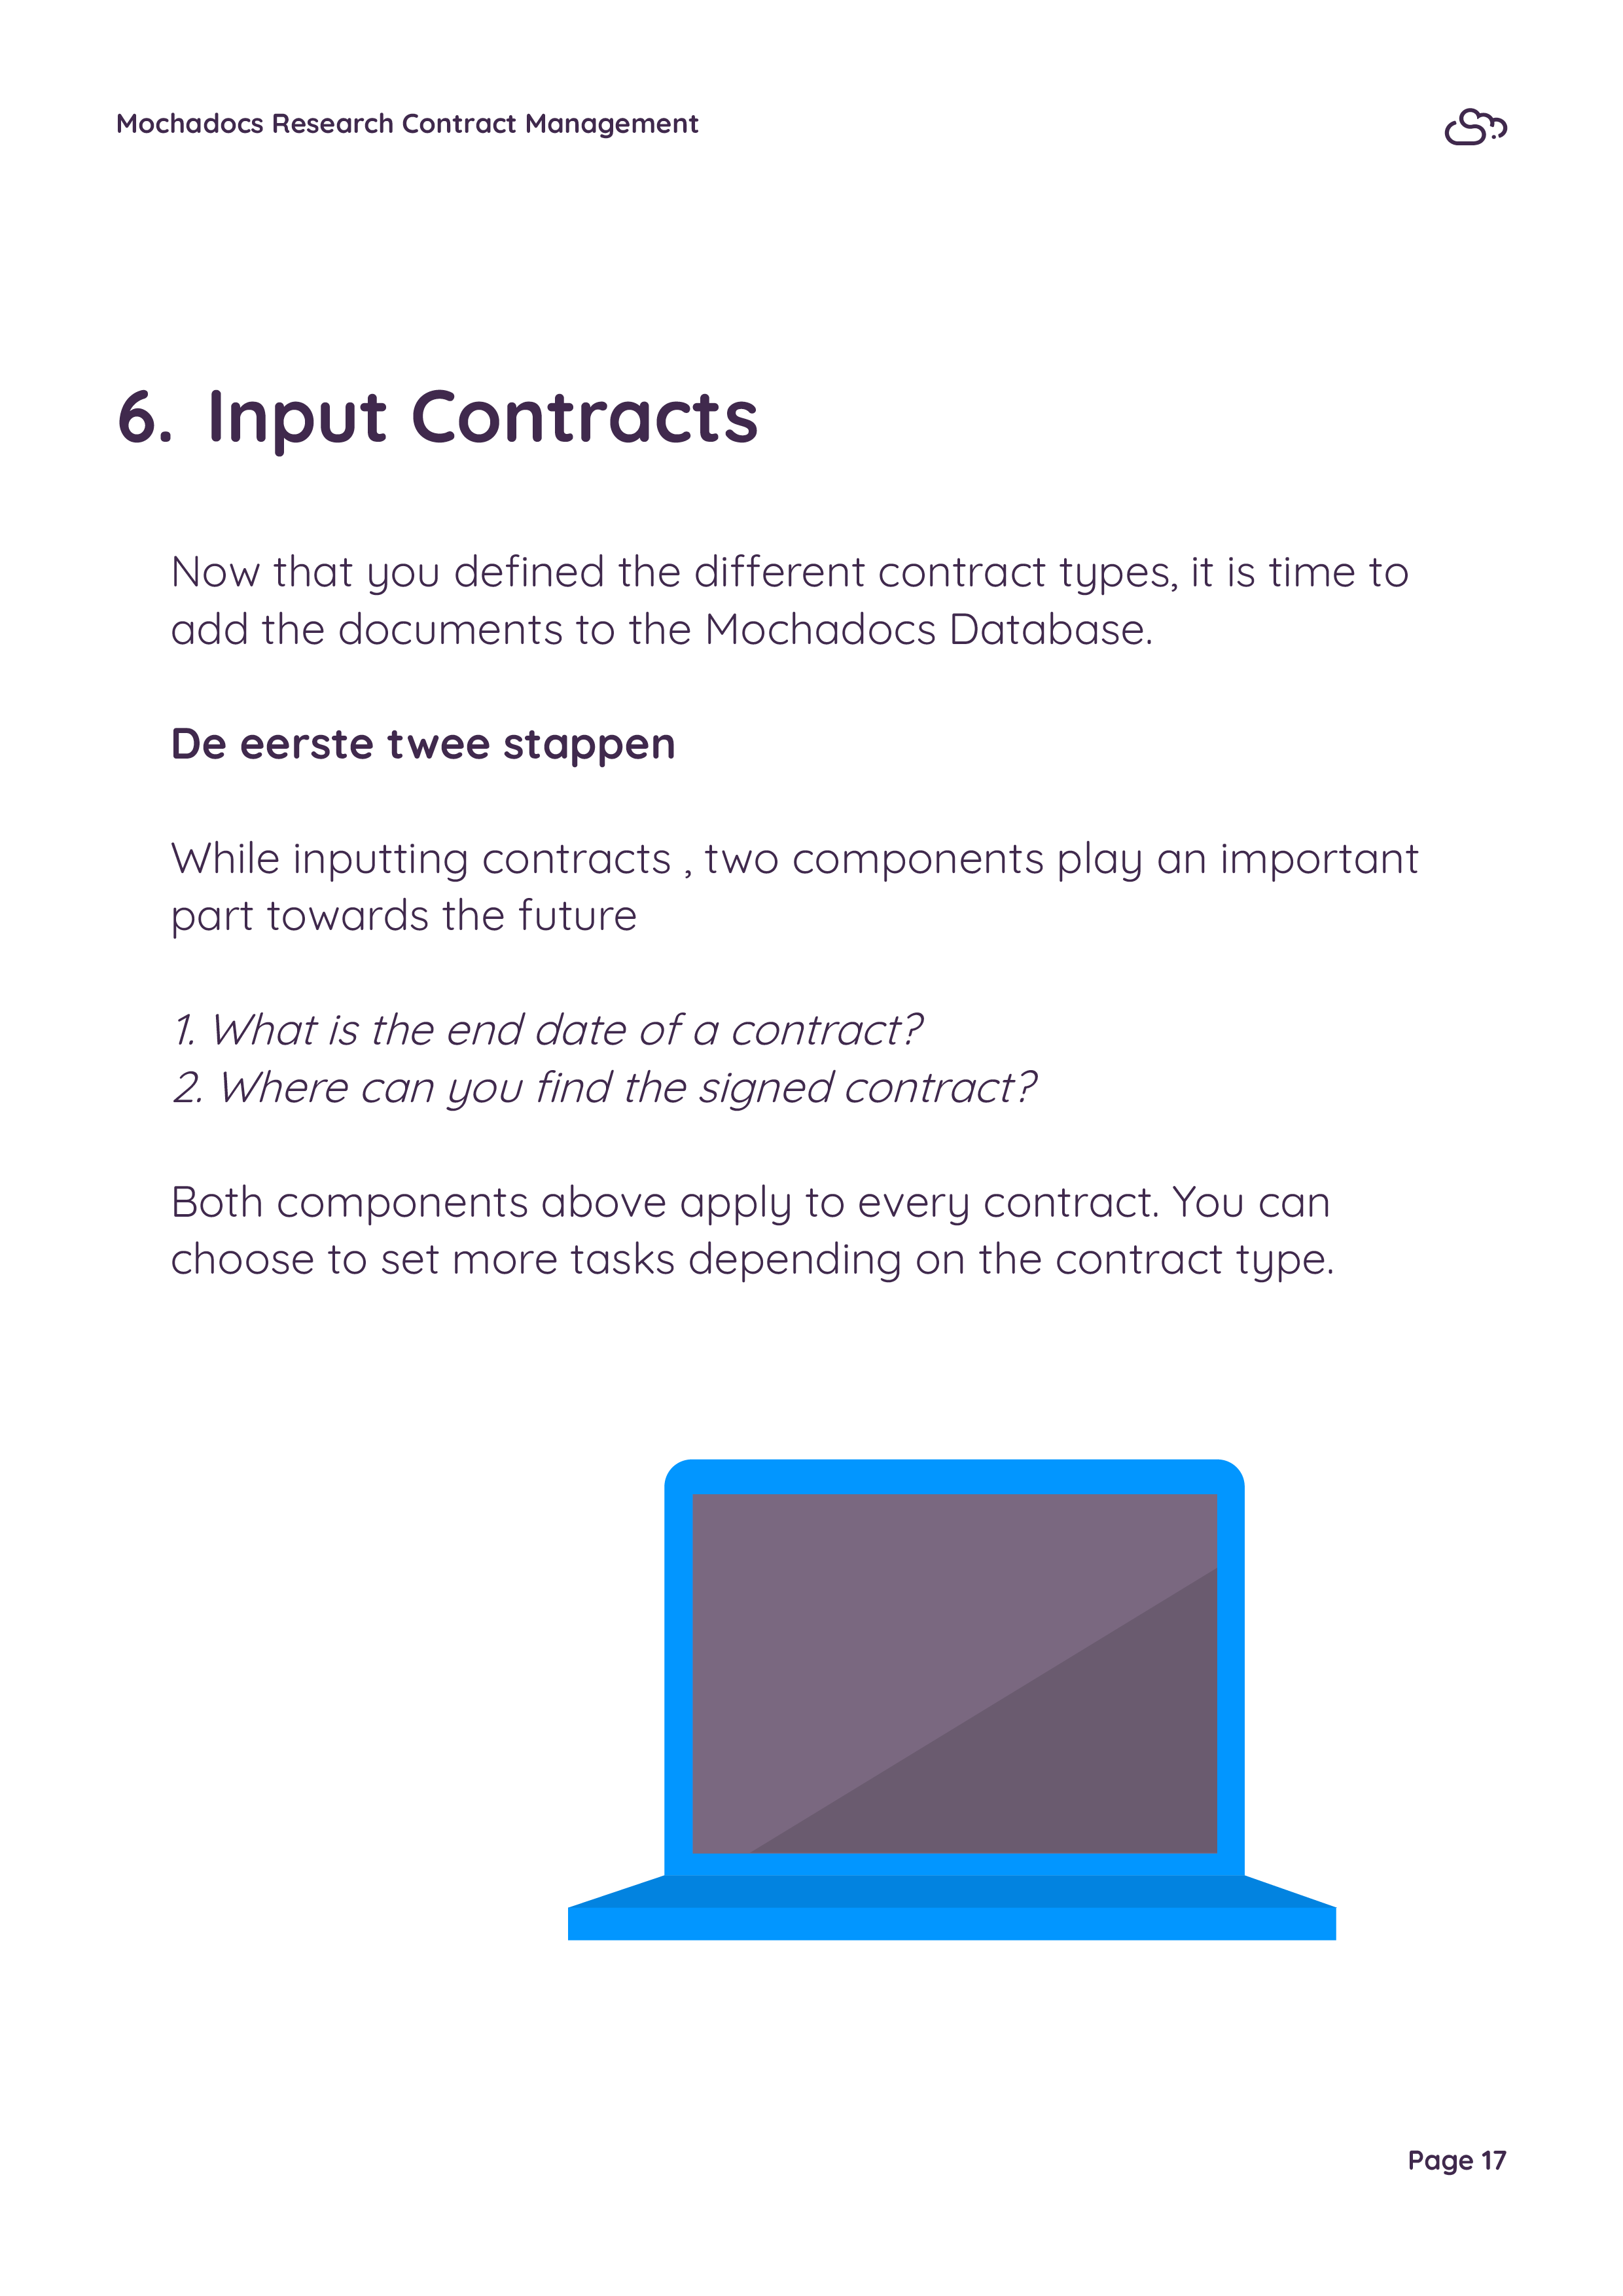 eBook Seven Contract Implementation Steps17